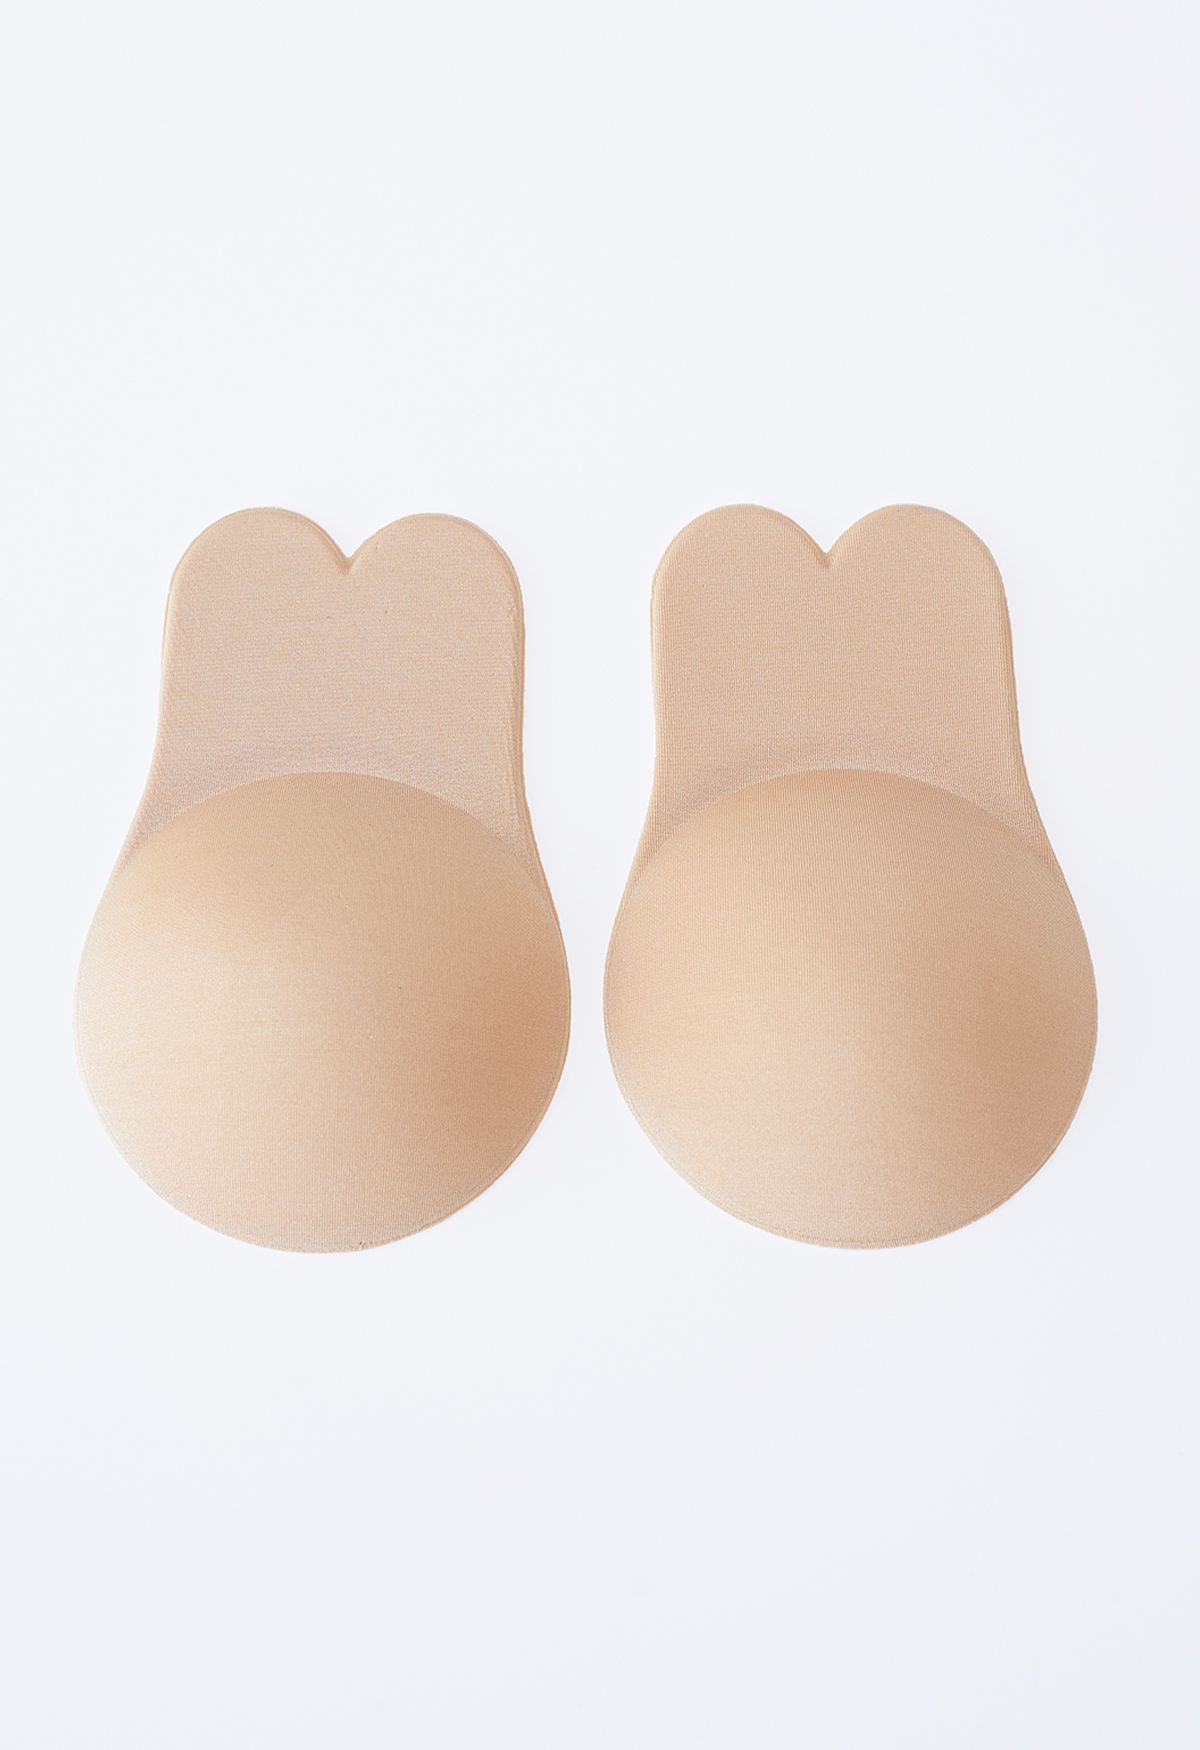 Bunny Ear Adhesive Lift-Up Nude Bra - Retro, Indie and Unique Fashion